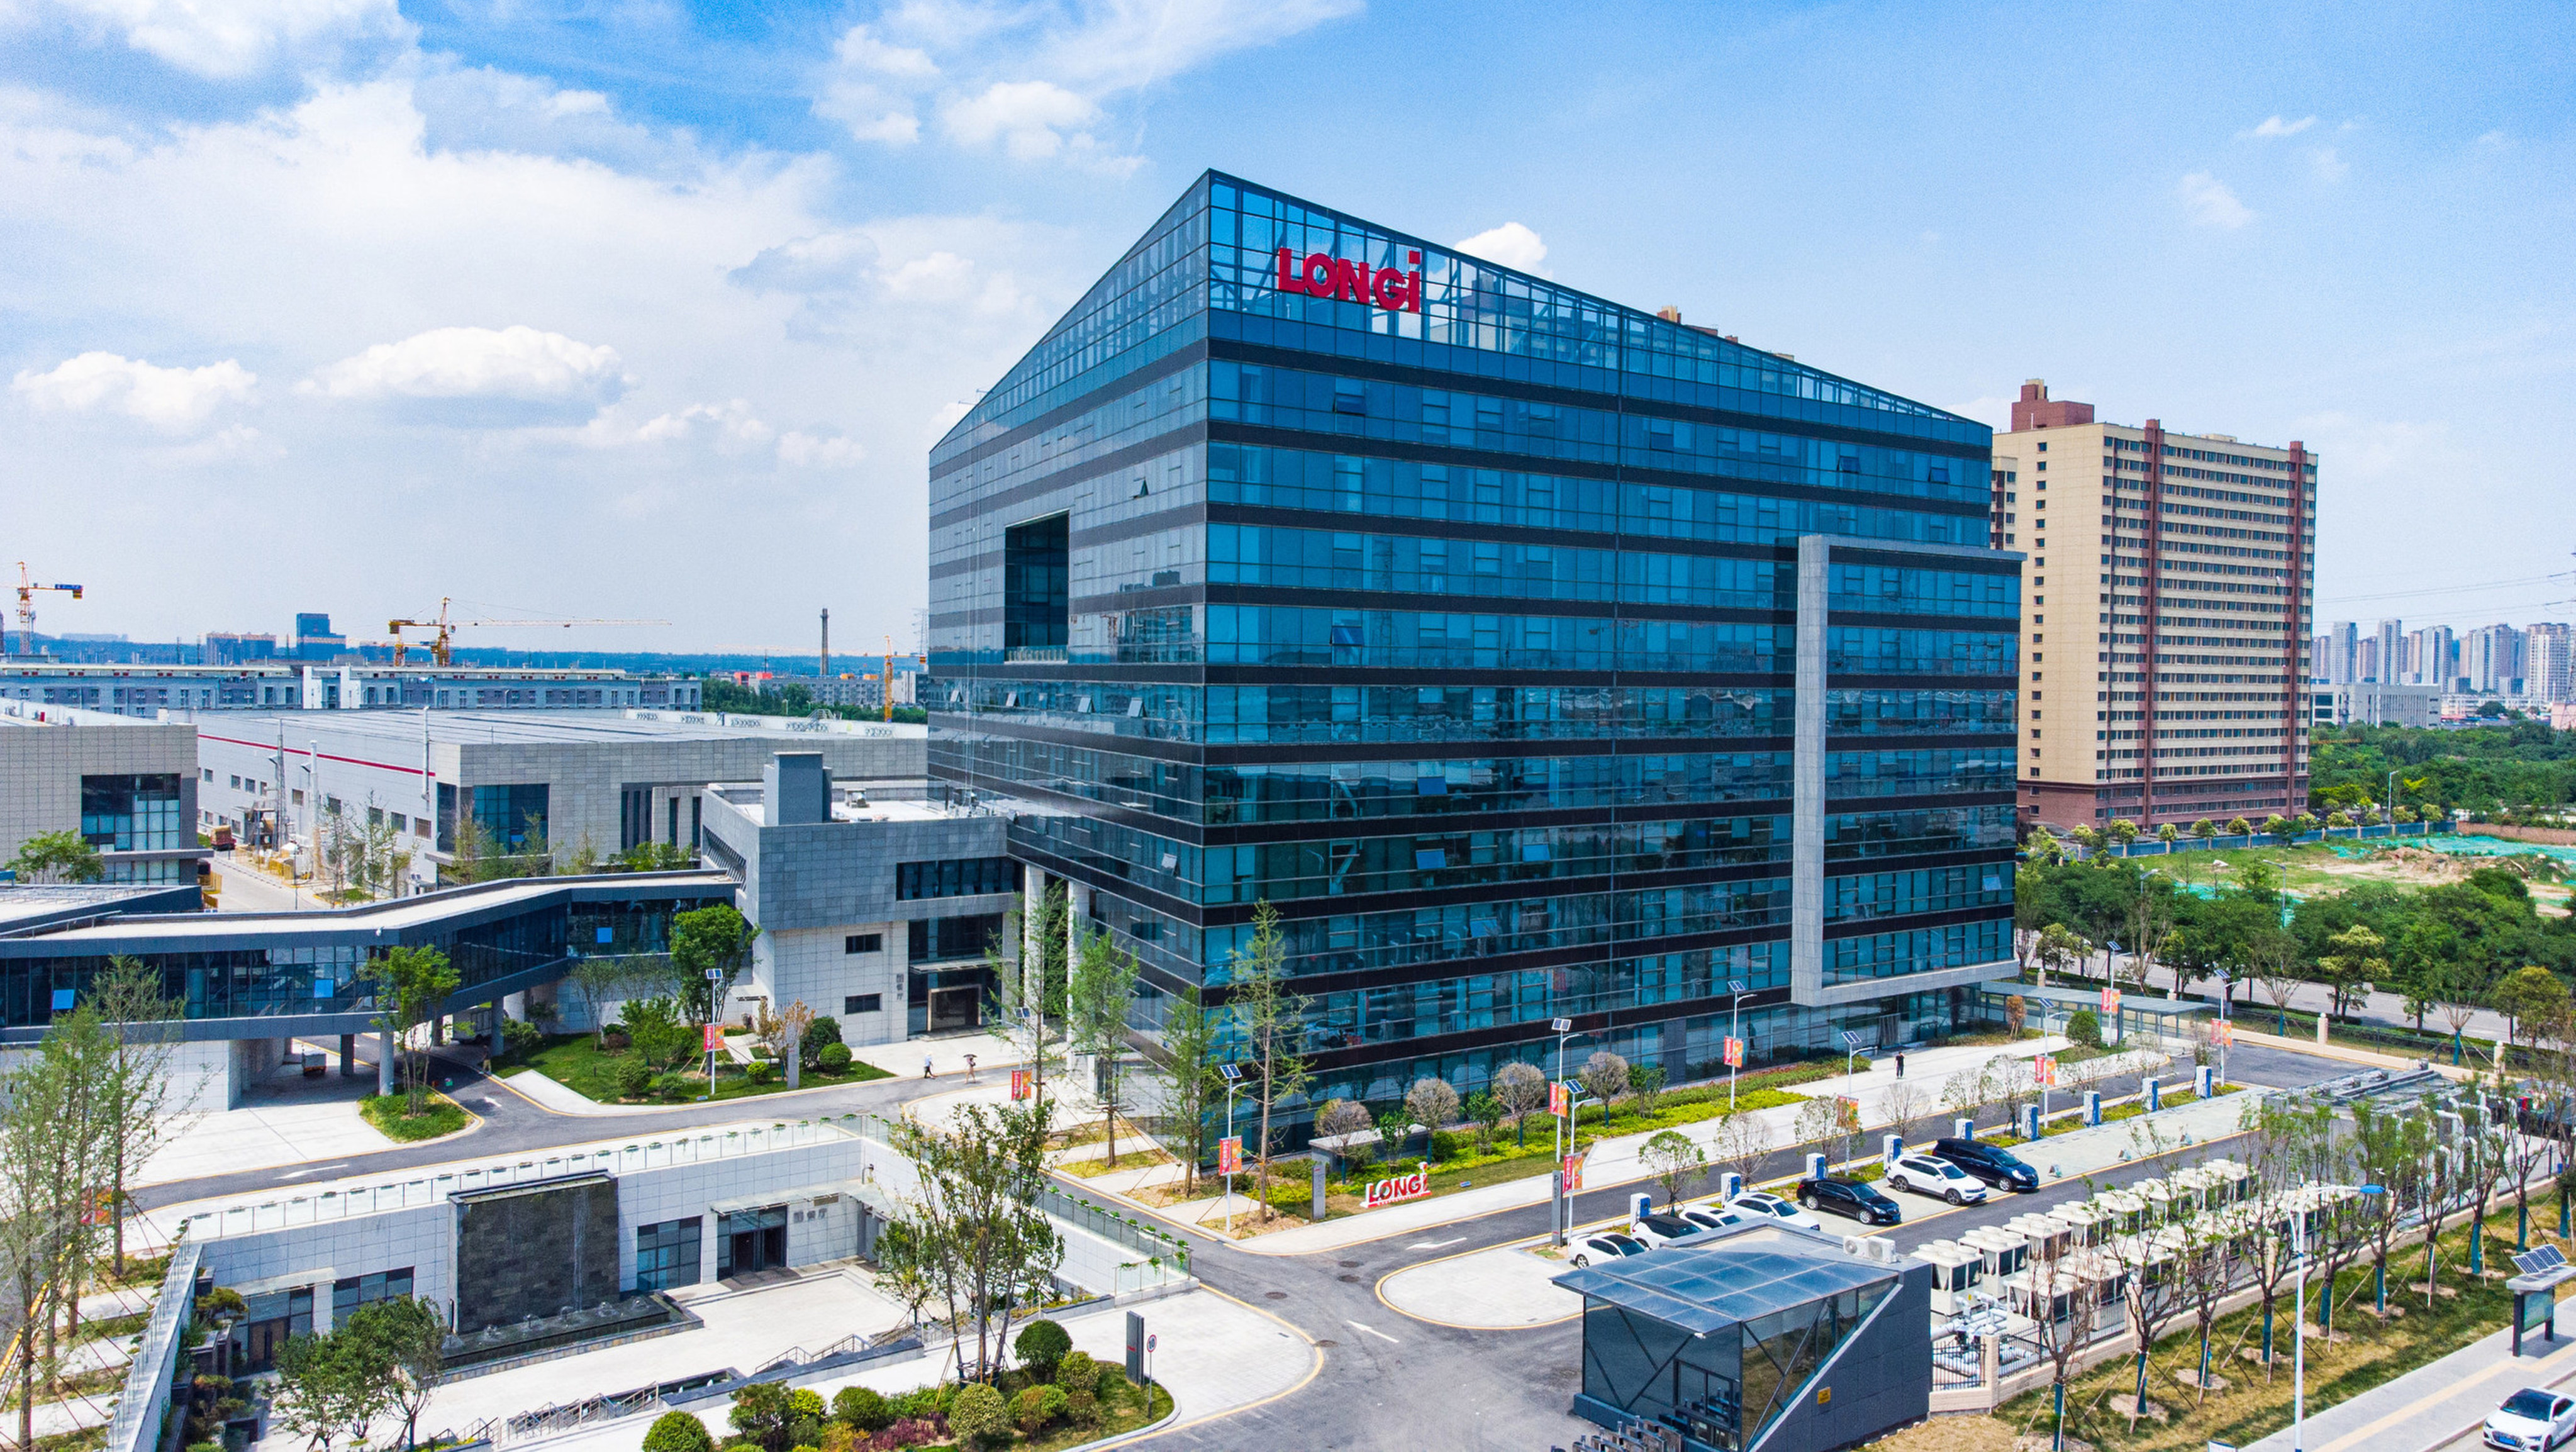 The Longi headquarters in Xian. The firm’s quarterly revenue stood at 29.4 billion yuan, a year-on-year decrease of 19 per cent and also its first quarterly revenue decline since the second quarter of 2017. Photo: Handout